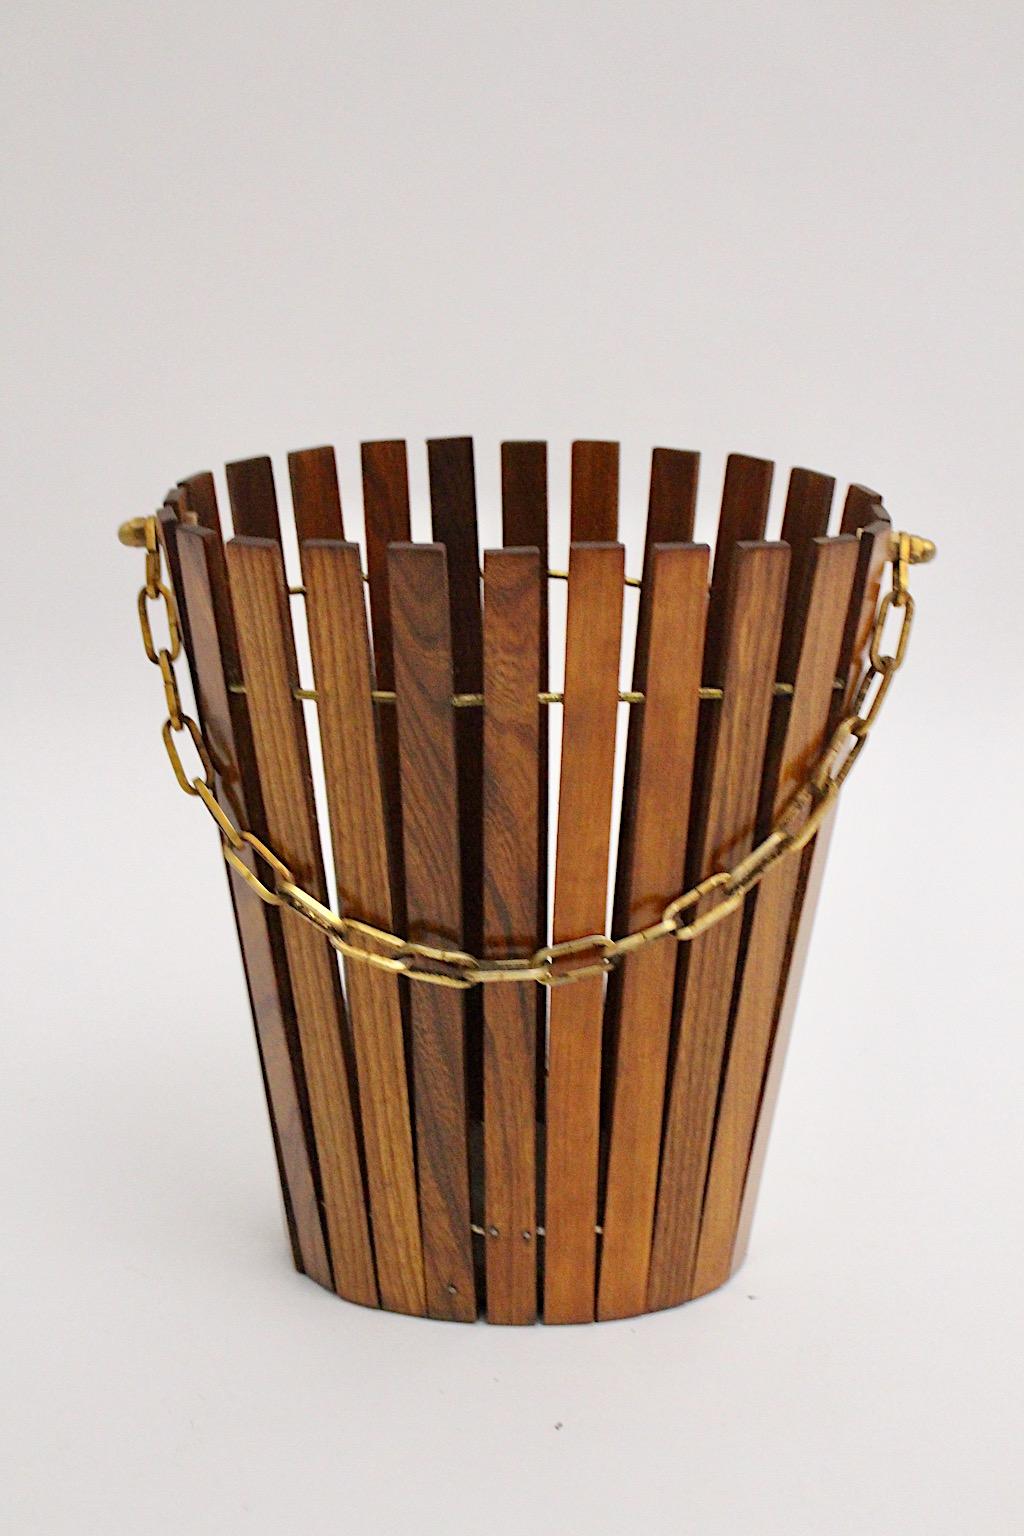 Mid-Century Modern vintage paper basket from ash and brass Austria 1960s.
The conical oval shape is formed with brown stained and lacquered ash lamellas and based with a pressboard plate.
While the slats are connected with brass rings the basket